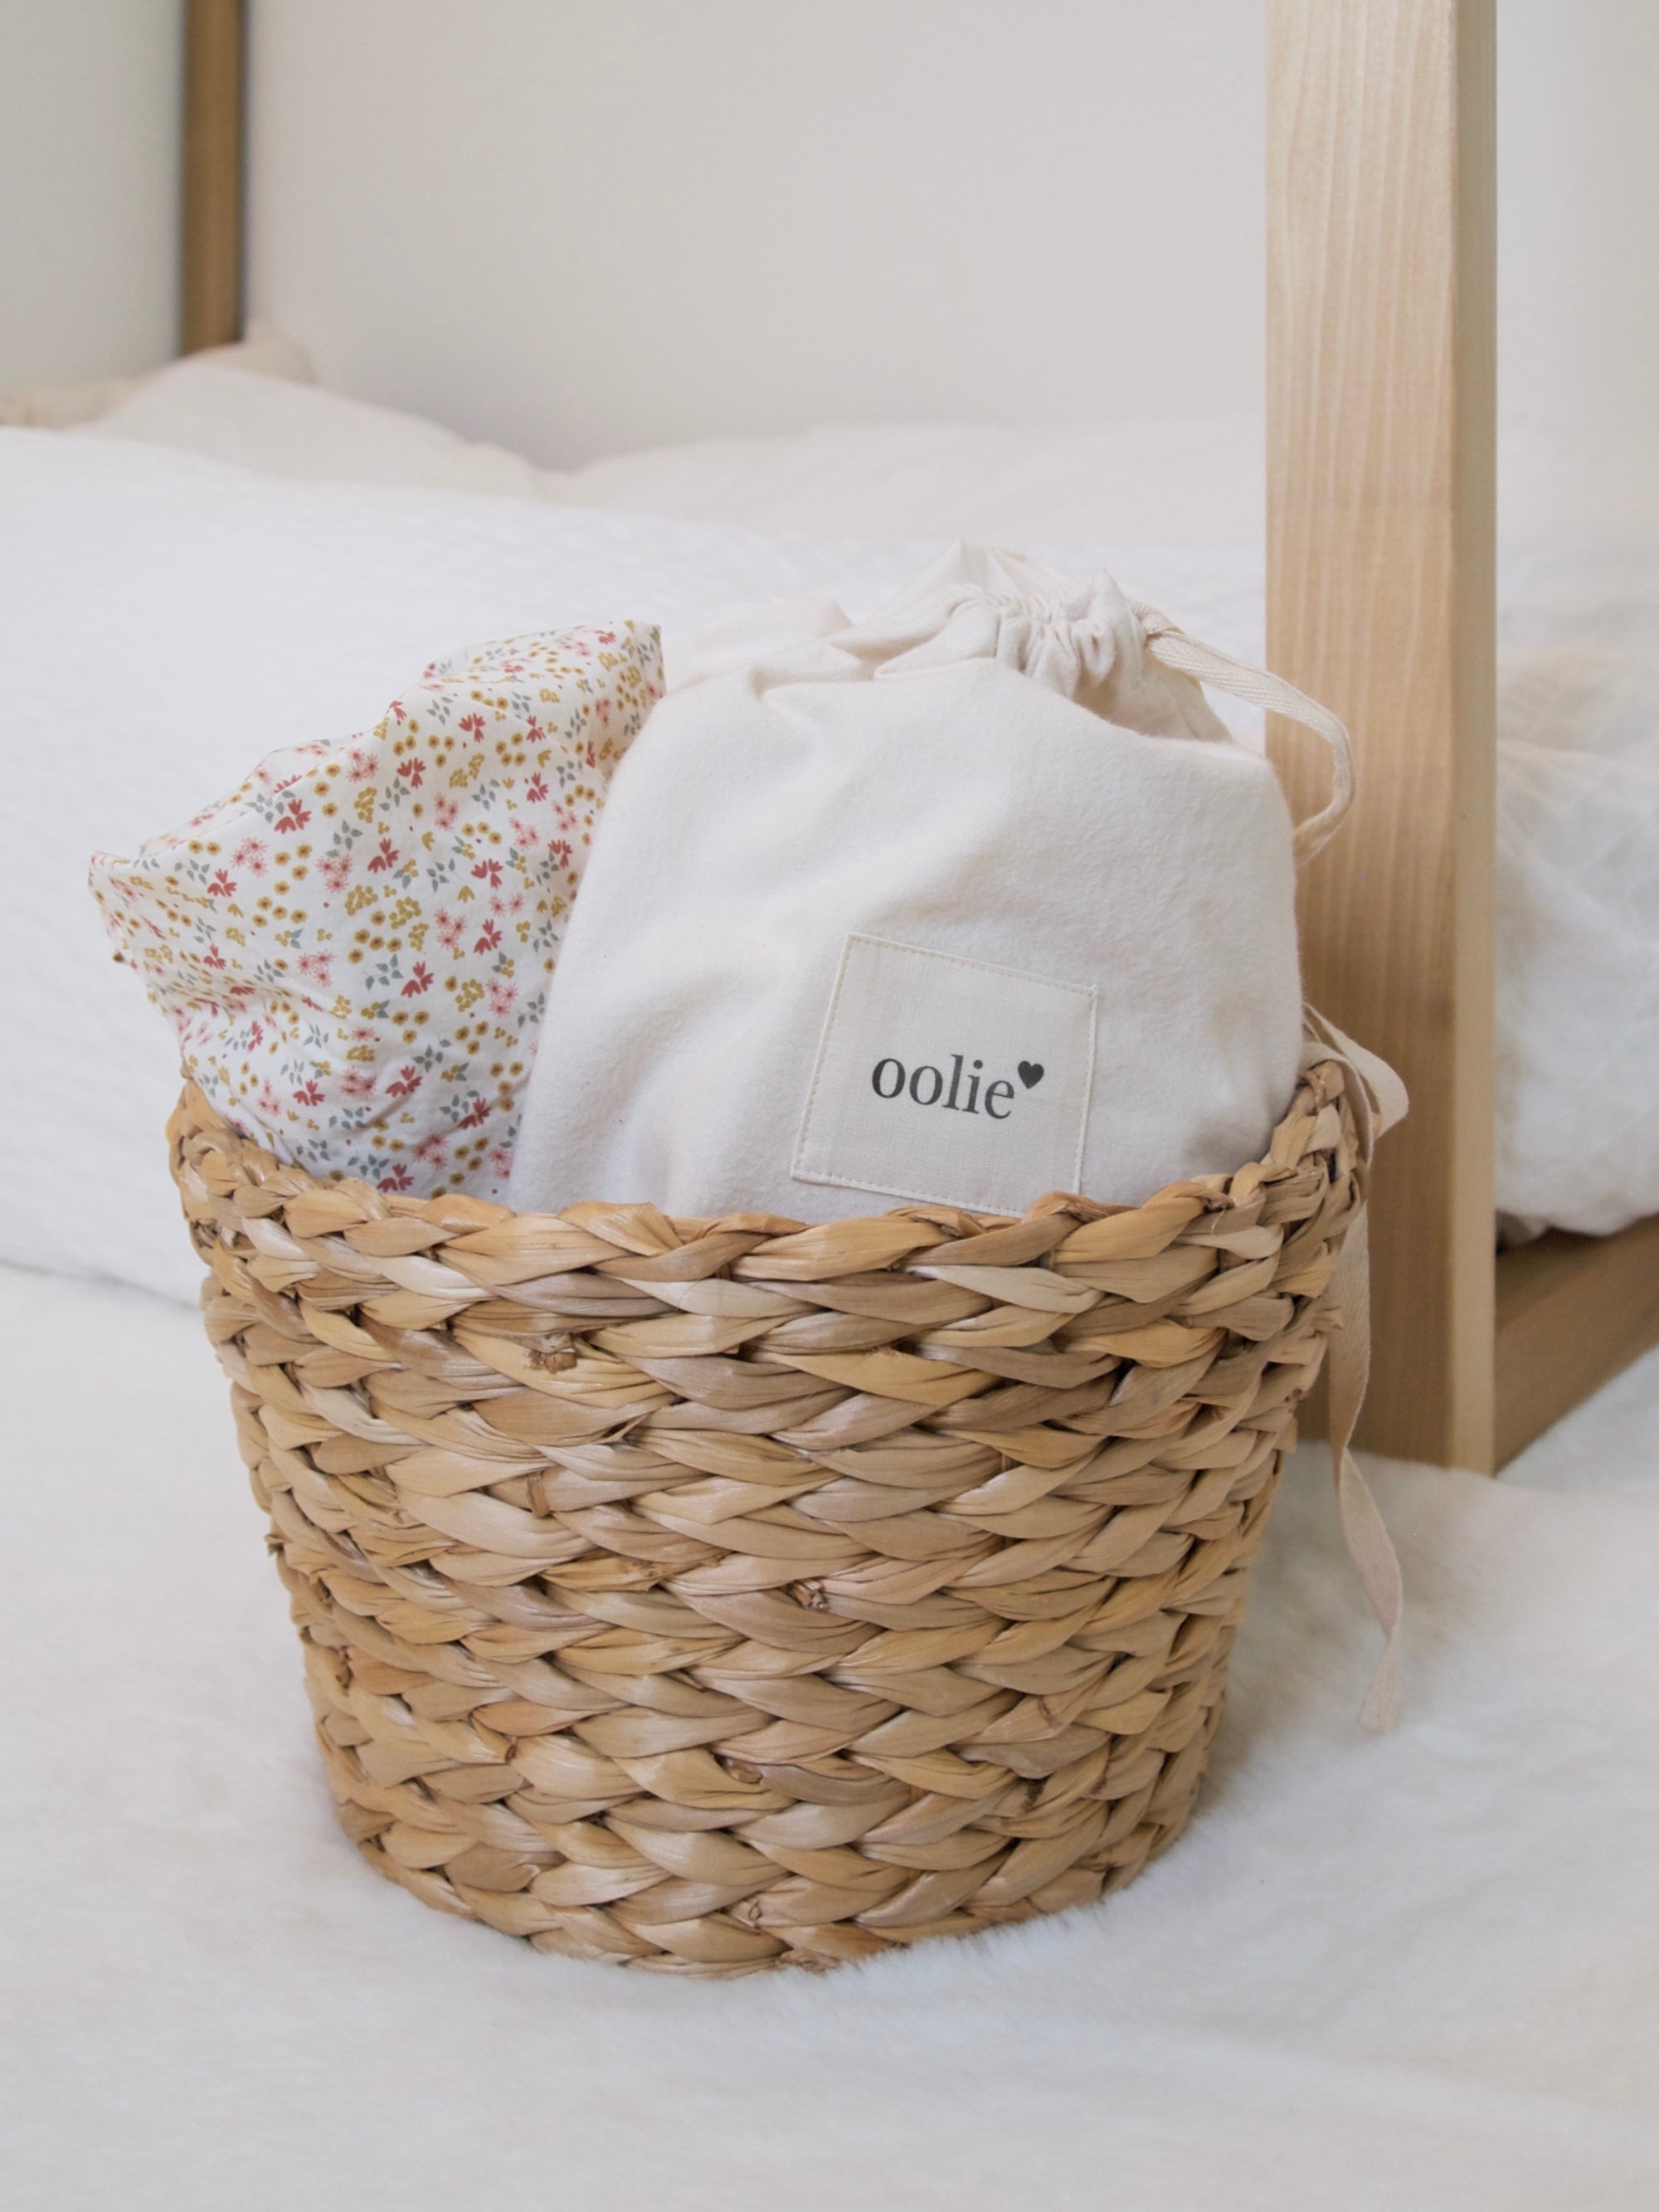 Oolie crib sheets with floral prints rolled into a natural, woven basket, showing a natural organic cotton bag with the Oolie heart logo.